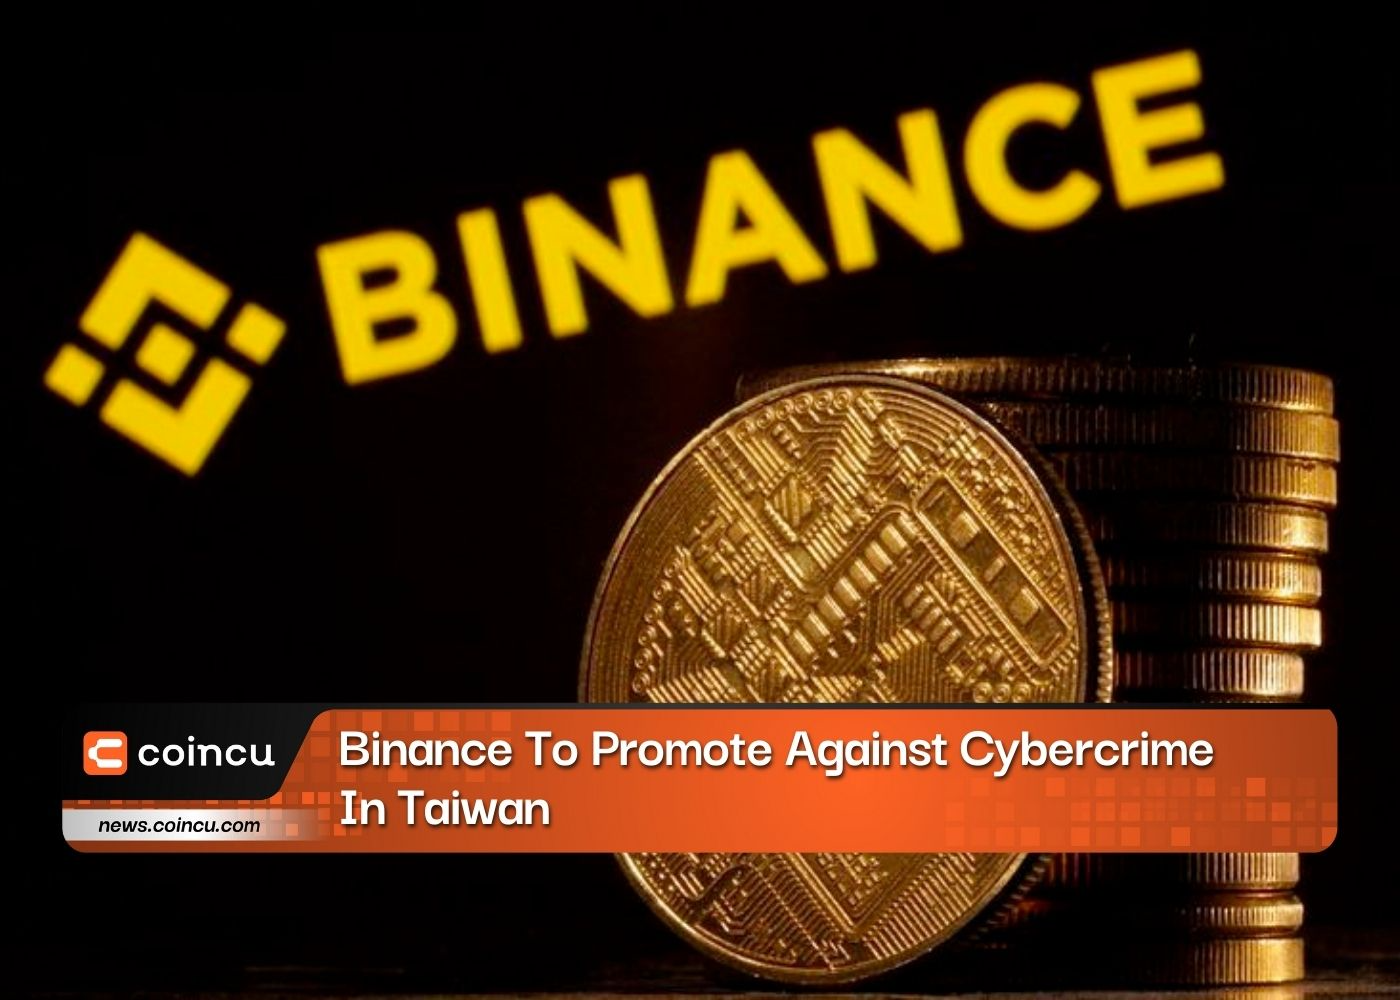 Binance To Promote Against Cybercrime In Taiwan